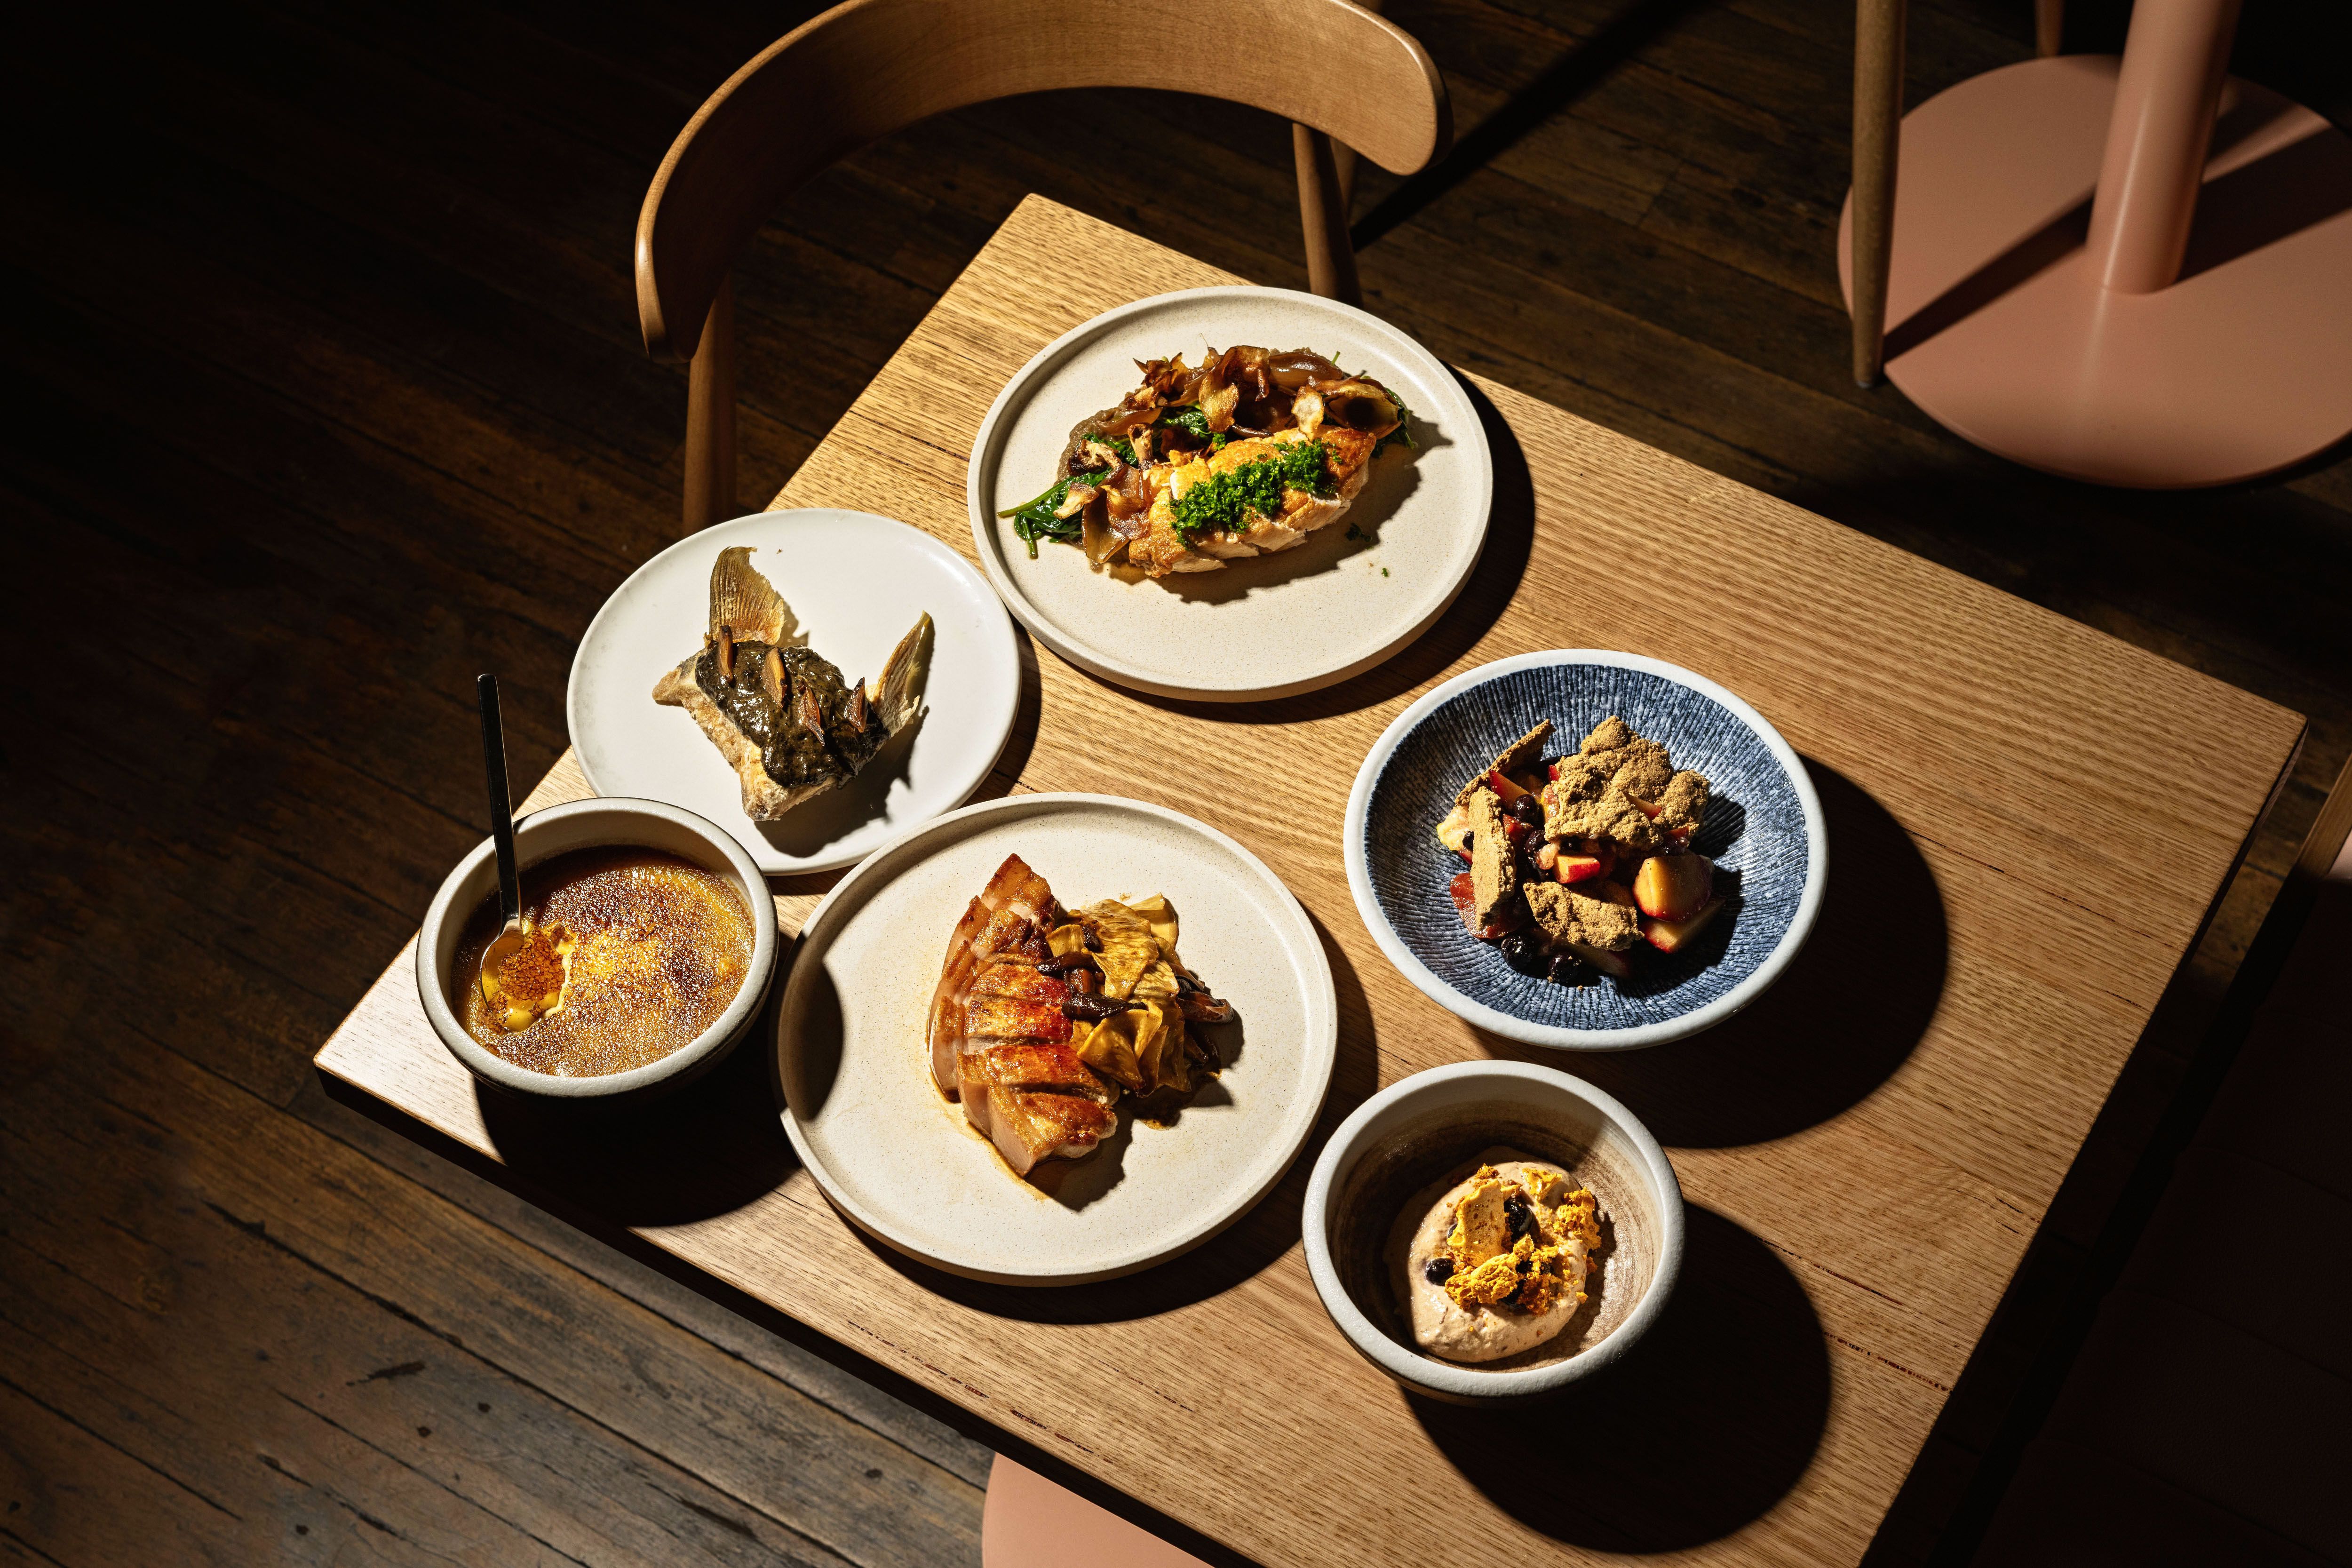 Hot in the City: There's lots to love at ILY in NewActon